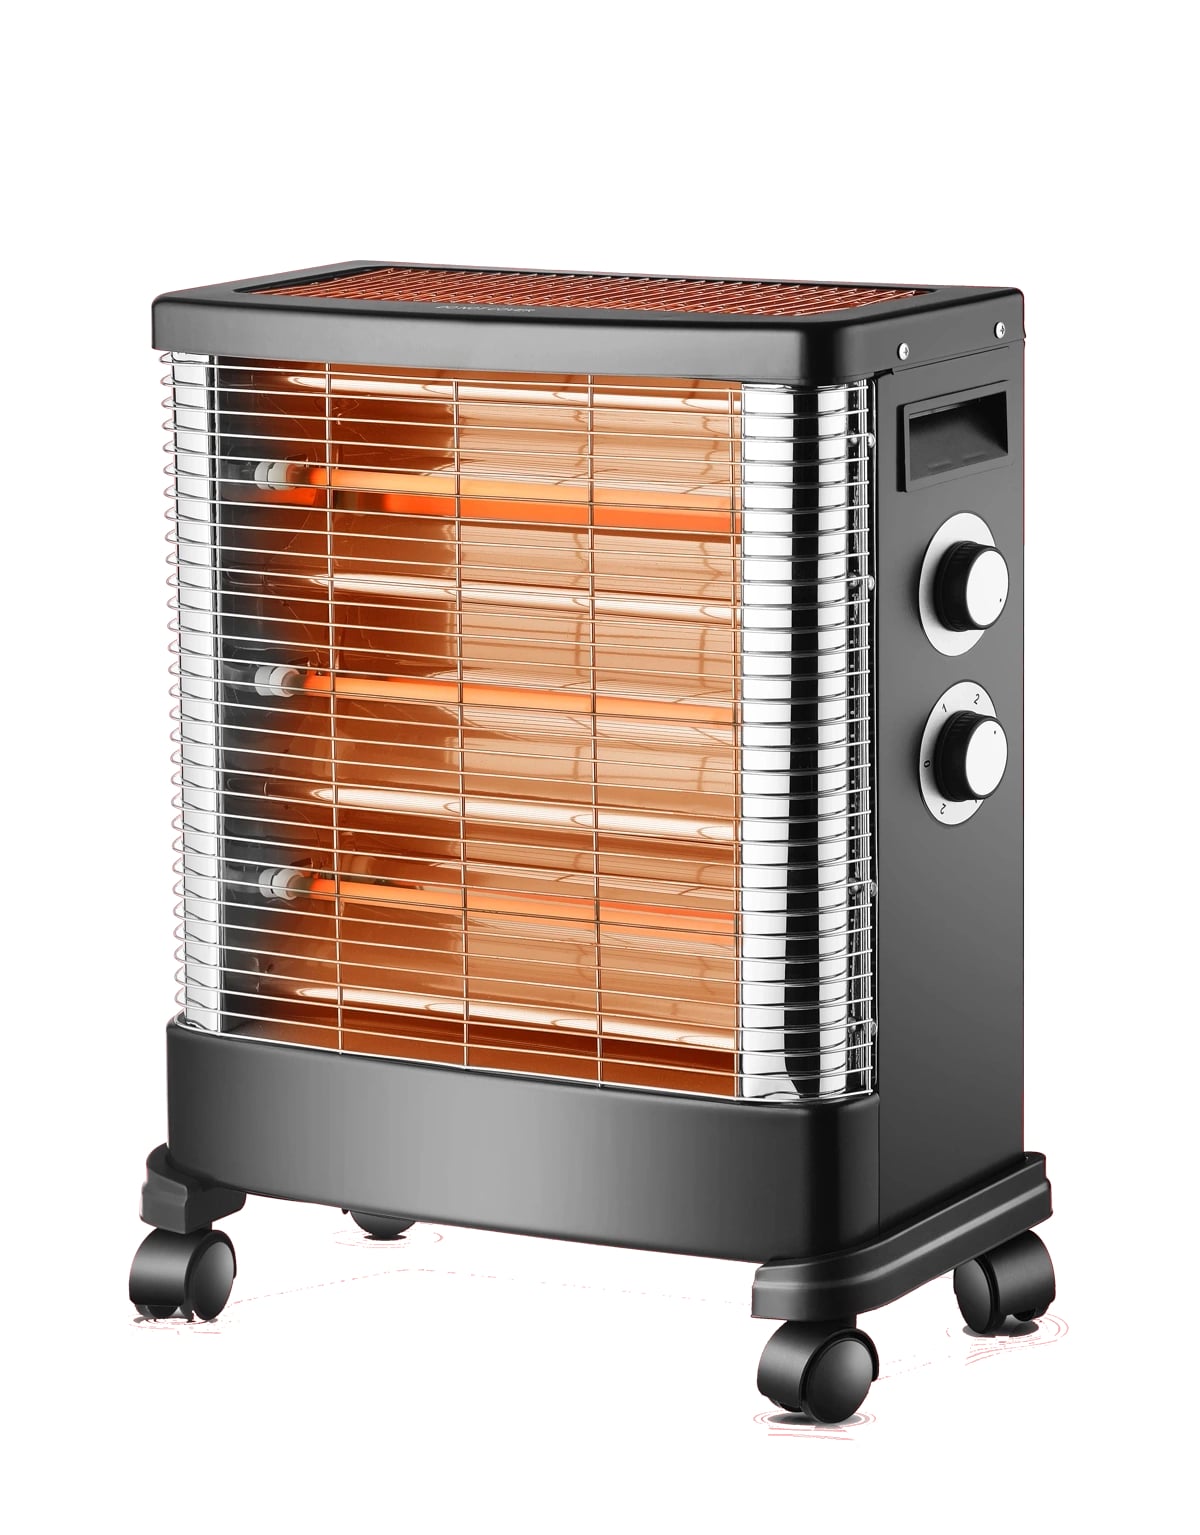 Electromatic Electric Heater with a Power of 2400W, 3 Heat Levels, Fall Safety System